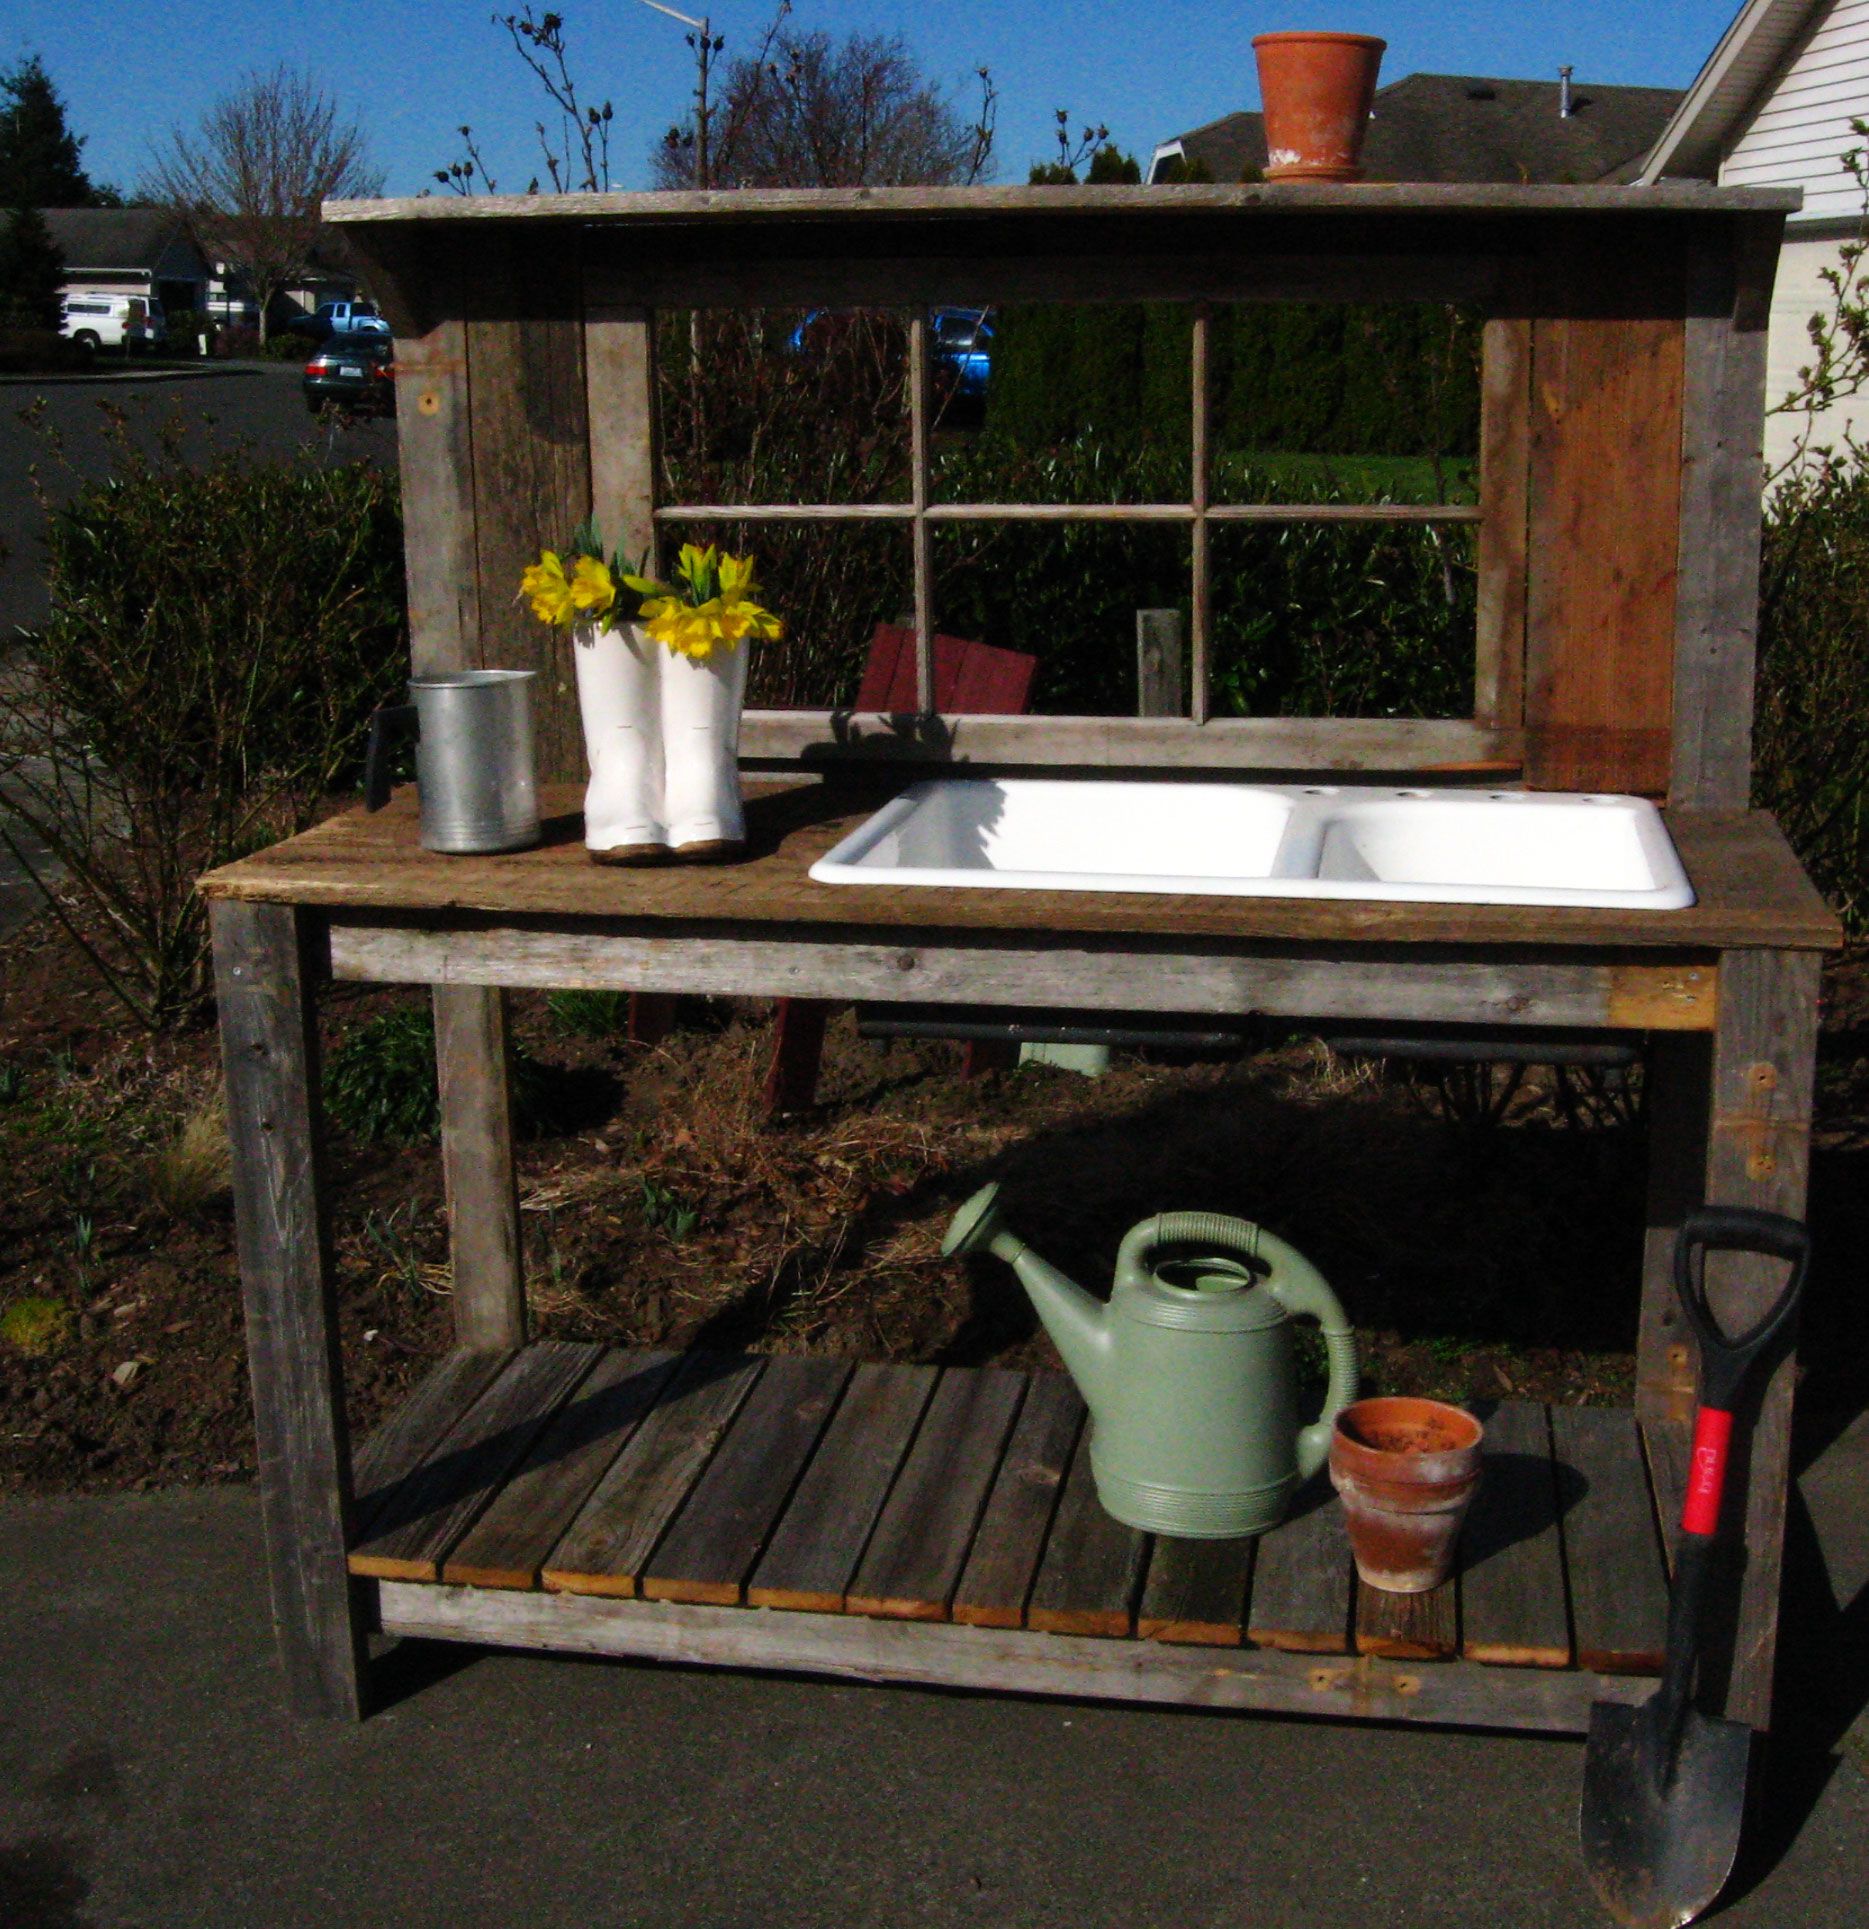 This Rustic Distressed Finish Garden Potting Bench